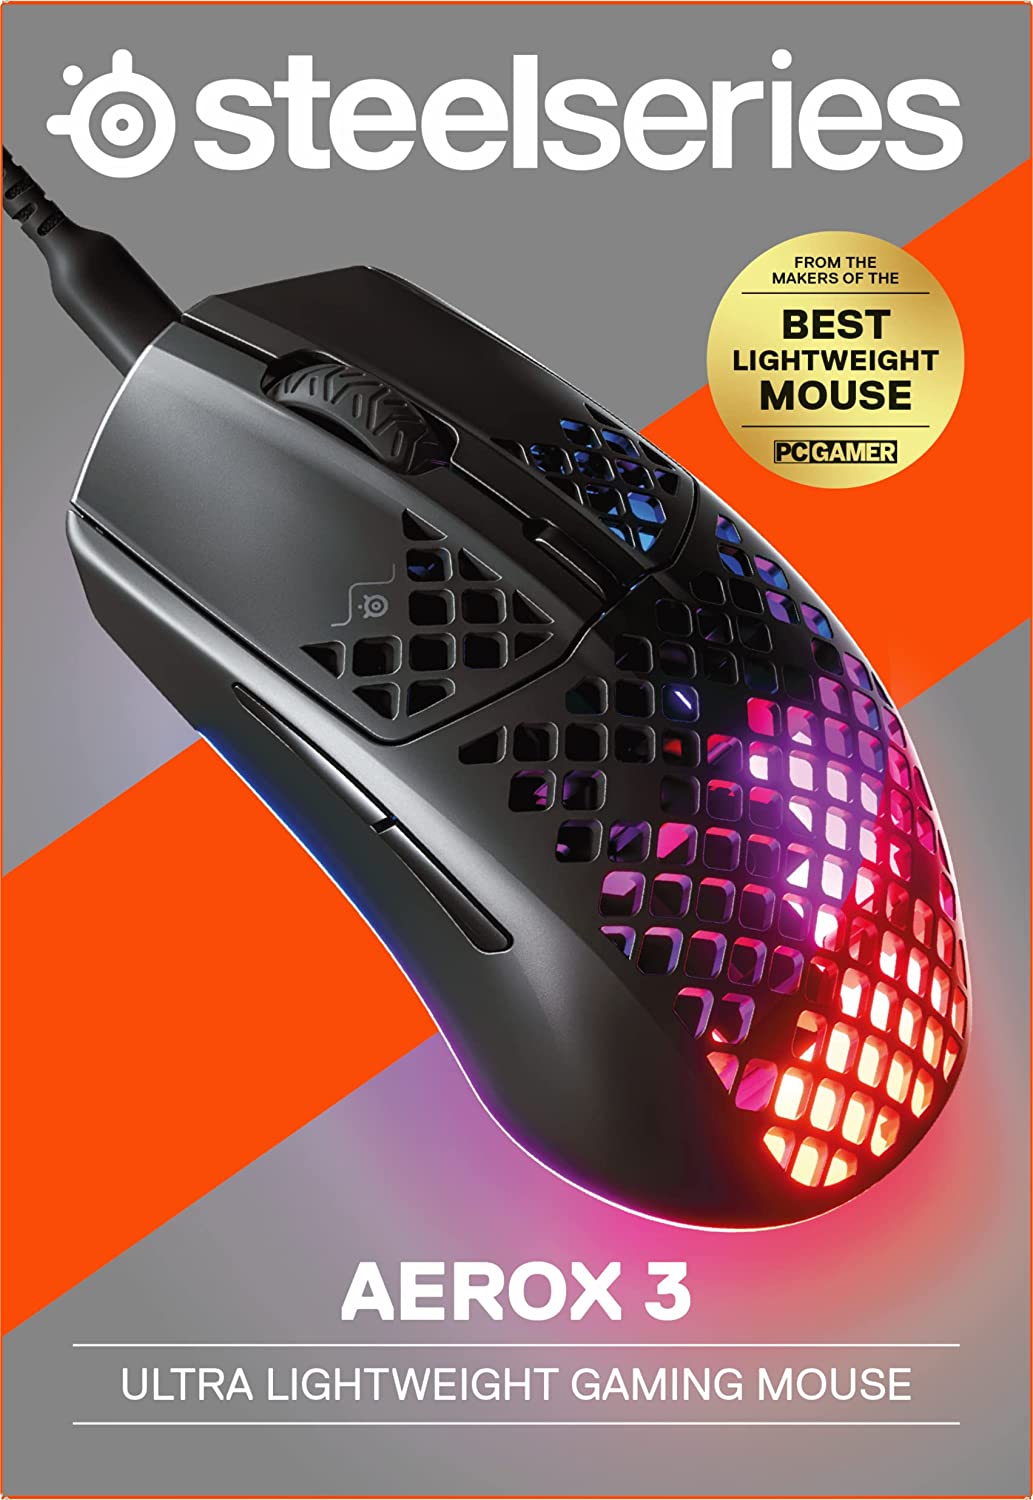 SteelSeries Airox 3 Ultra-Light Gaming Mouse